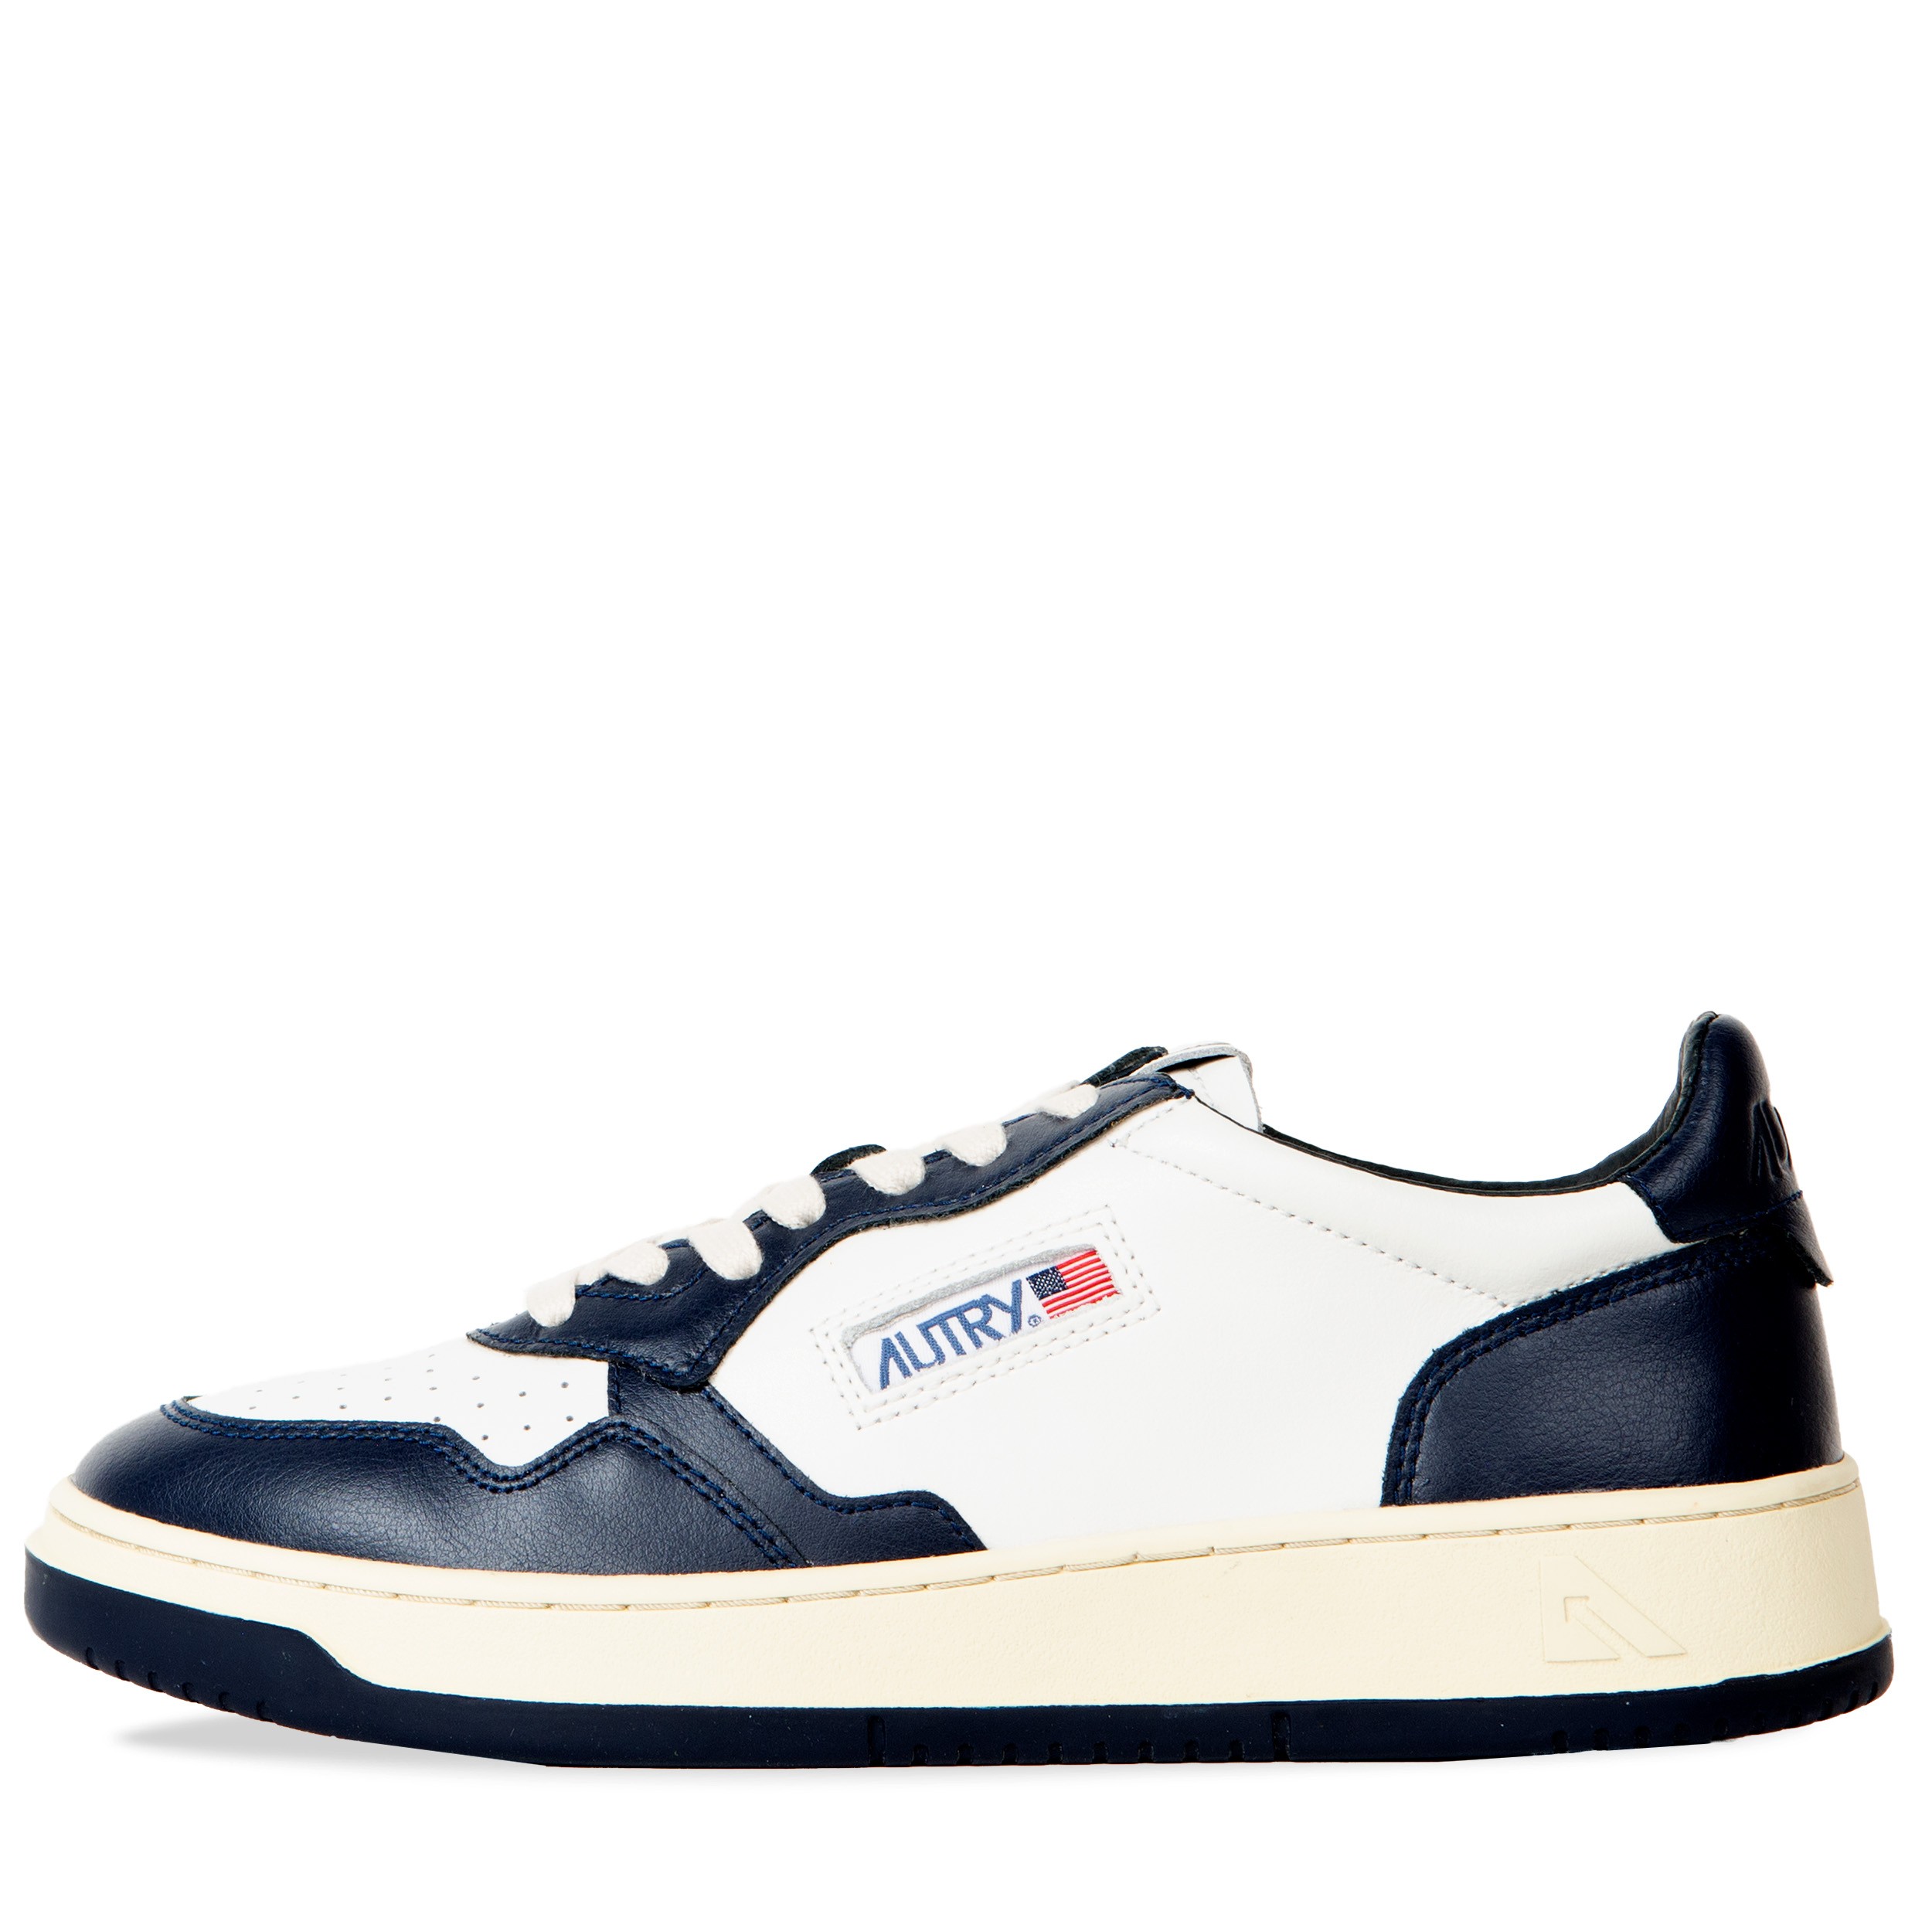 Autry Low Top Two Tone Leather Sneakers Navy and White 11 Mens 11 (EU 45)